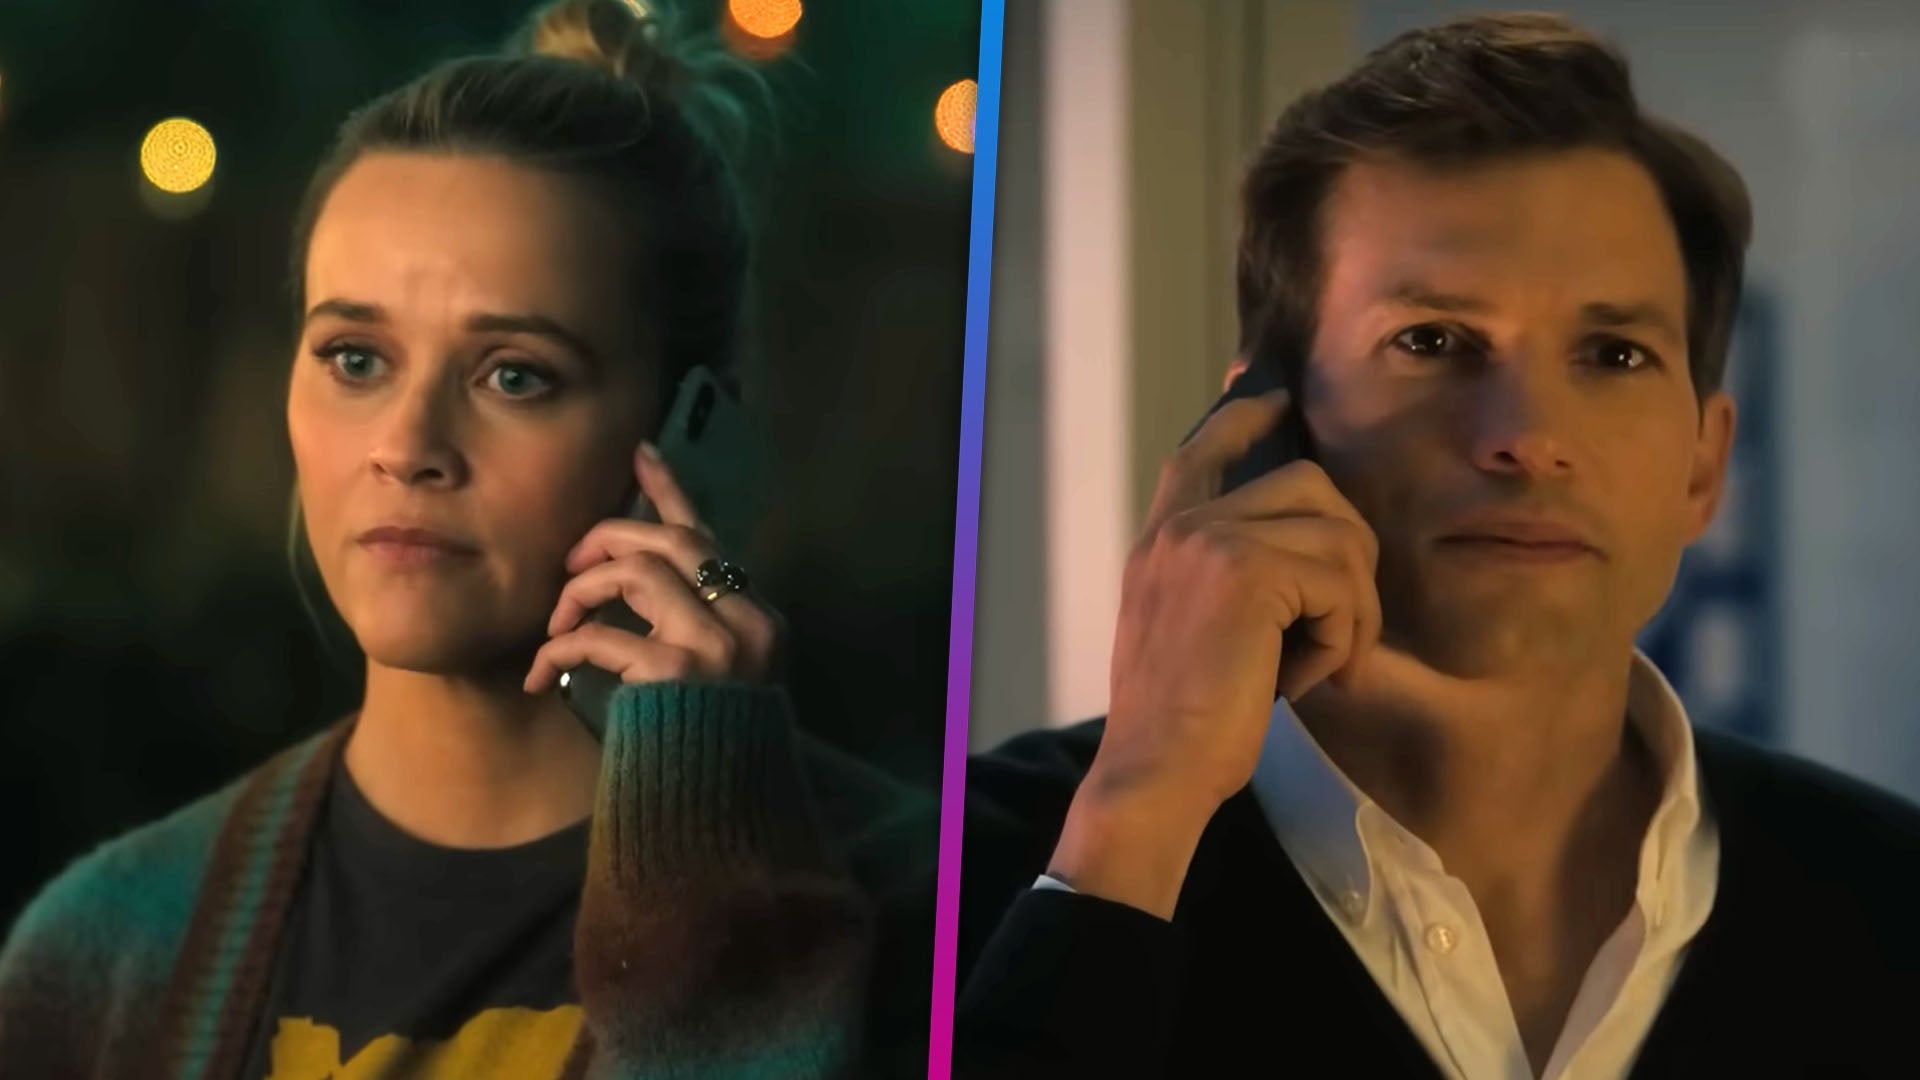 Reese Witherspoon and Ashton Kutcher SWAP LIVES in 'Your Place or Mine' Trailer